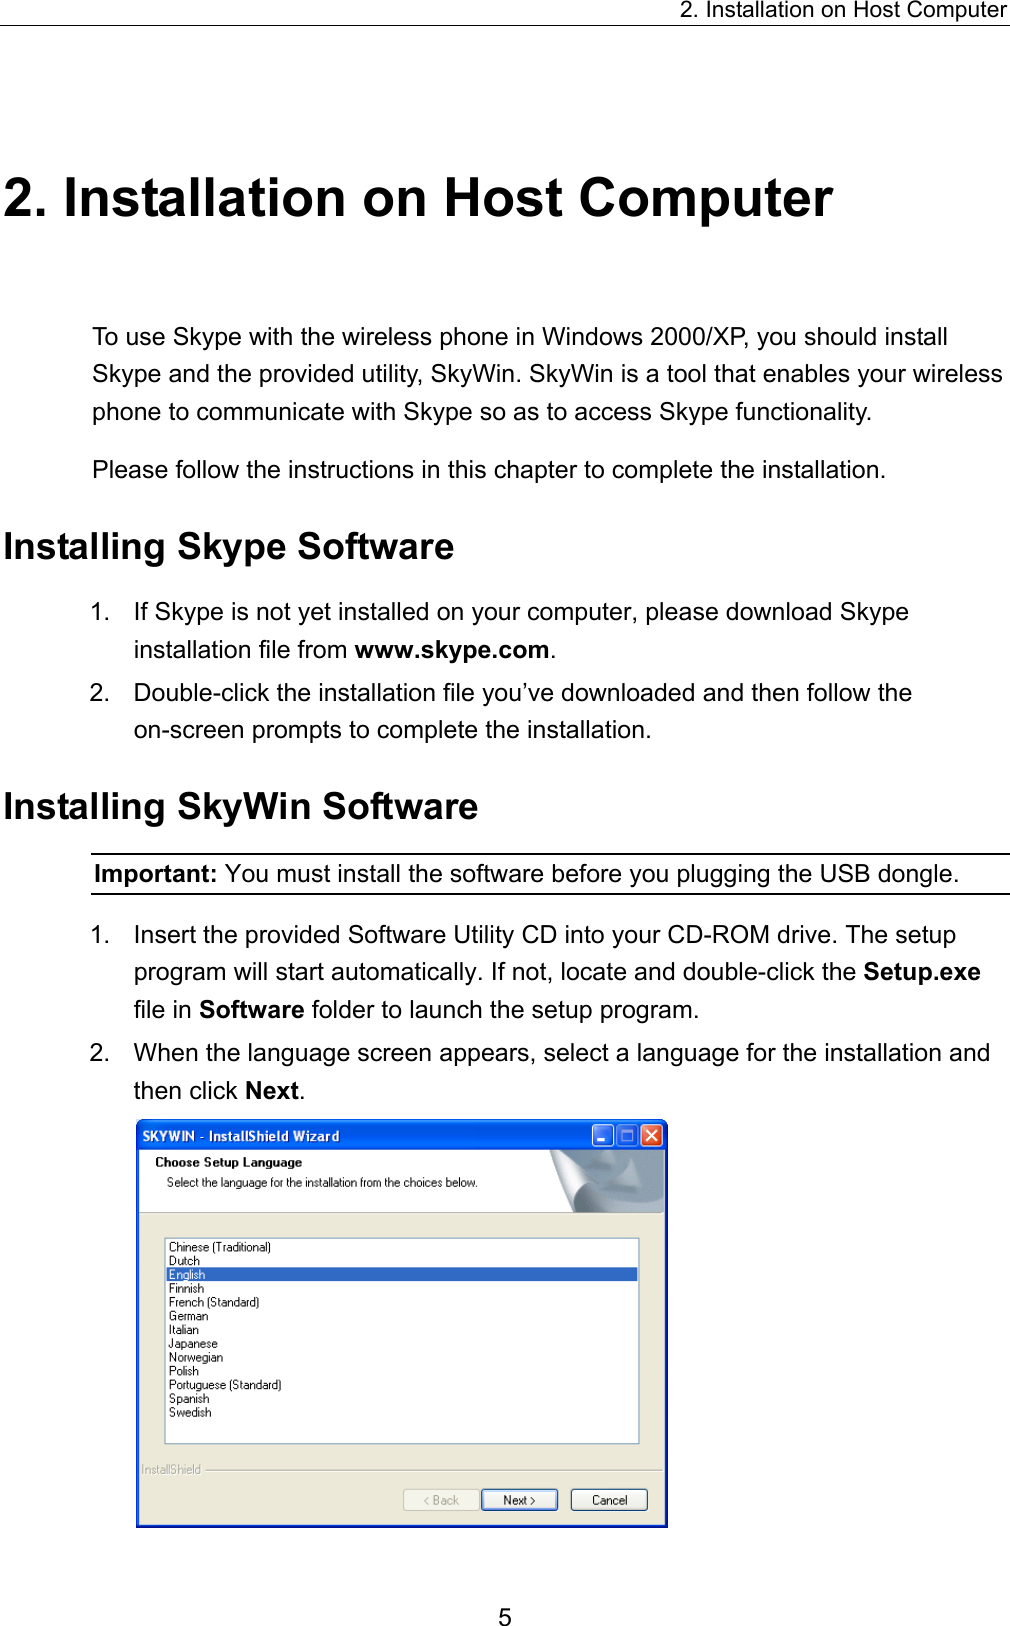 2. Installation on Host Computer 2. Installation on Host Computer To use Skype with the wireless phone in Windows 2000/XP, you should install Skype and the provided utility, SkyWin. SkyWin is a tool that enables your wireless phone to communicate with Skype so as to access Skype functionality. Please follow the instructions in this chapter to complete the installation. Installing Skype Software 1.  If Skype is not yet installed on your computer, please download Skype installation file from www.skype.com. 2.  Double-click the installation file you’ve downloaded and then follow the on-screen prompts to complete the installation. Installing SkyWin Software Important: You must install the software before you plugging the USB dongle. 1.  Insert the provided Software Utility CD into your CD-ROM drive. The setup program will start automatically. If not, locate and double-click the Setup.exe file in Software folder to launch the setup program. 2.  When the language screen appears, select a language for the installation and then click Next.  5 